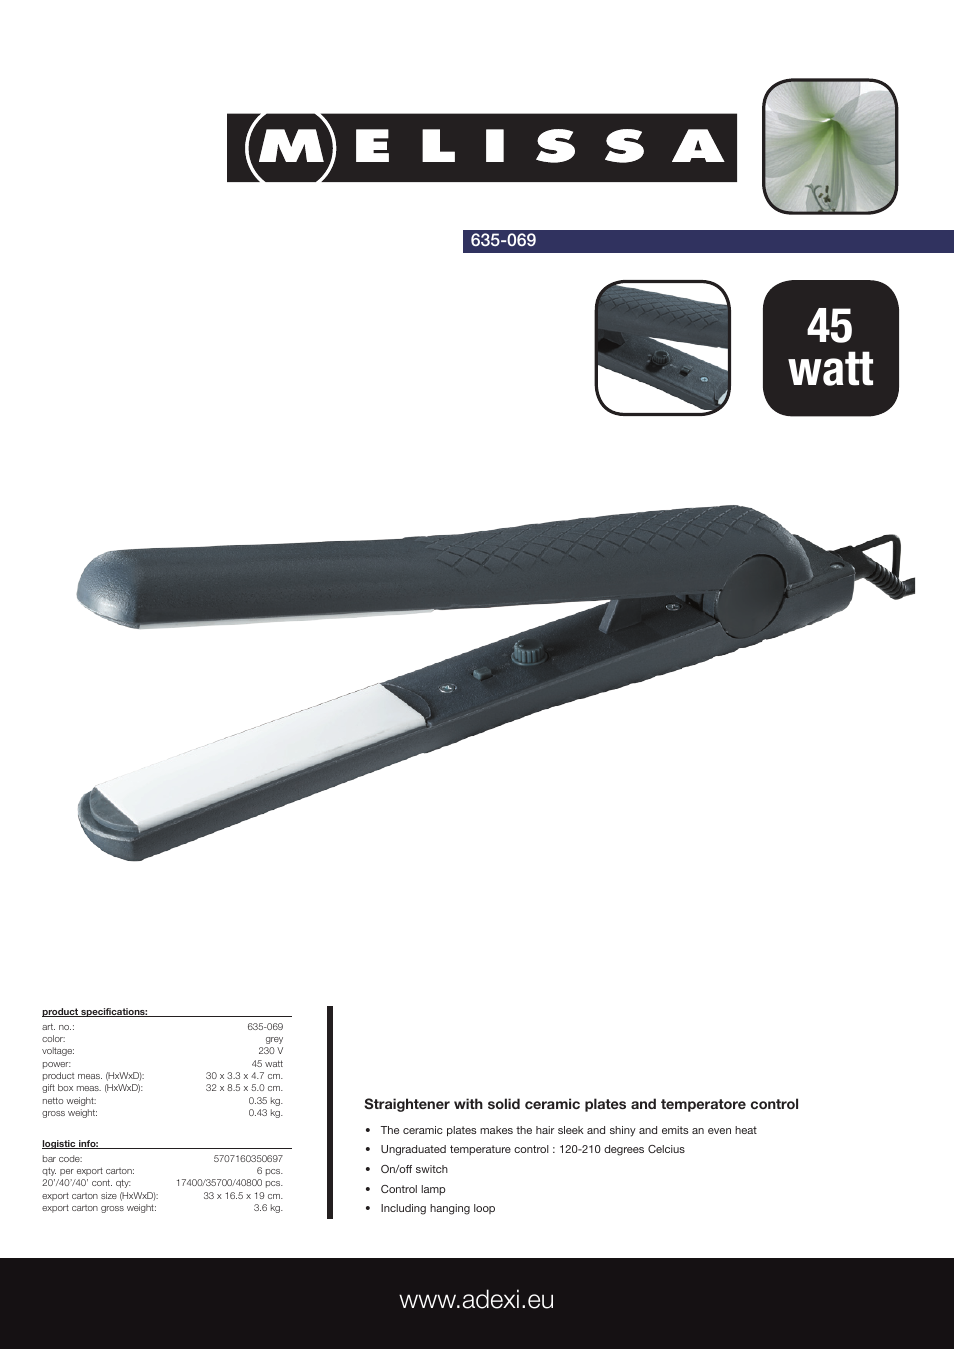 Straightener with Solid Ceramic Plates and Temperatore Control 635-069